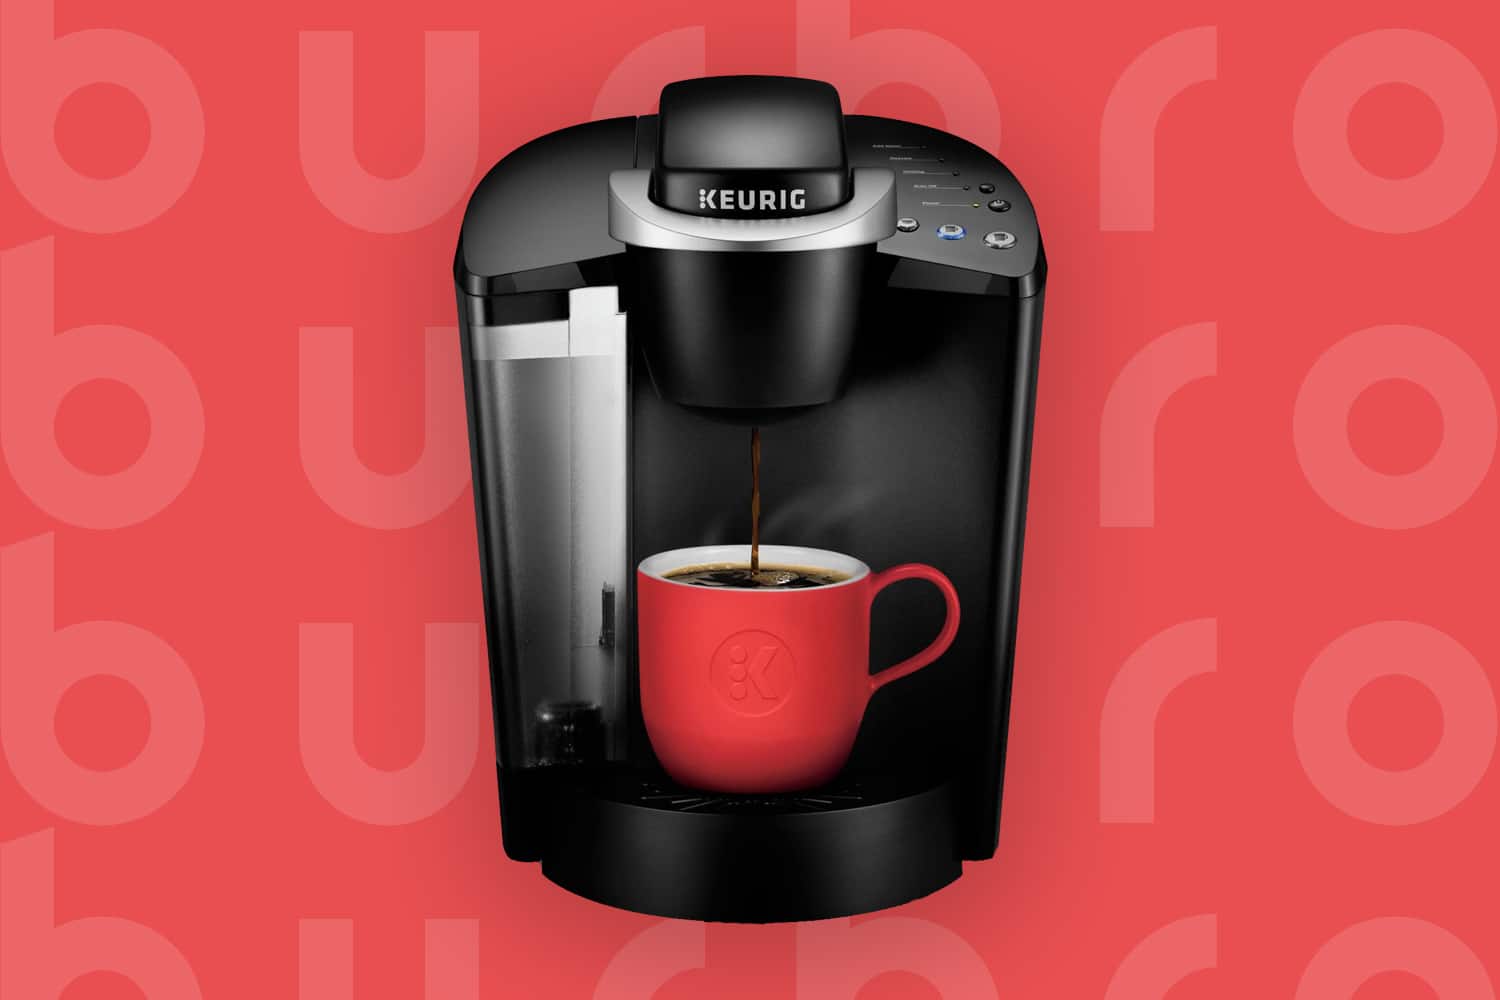 This is the cover photo in our Best Keurig Coffee Maker article. It features a black and silver Keurig machine overlaying a cherry red poster background with an embossed Burbro logo.